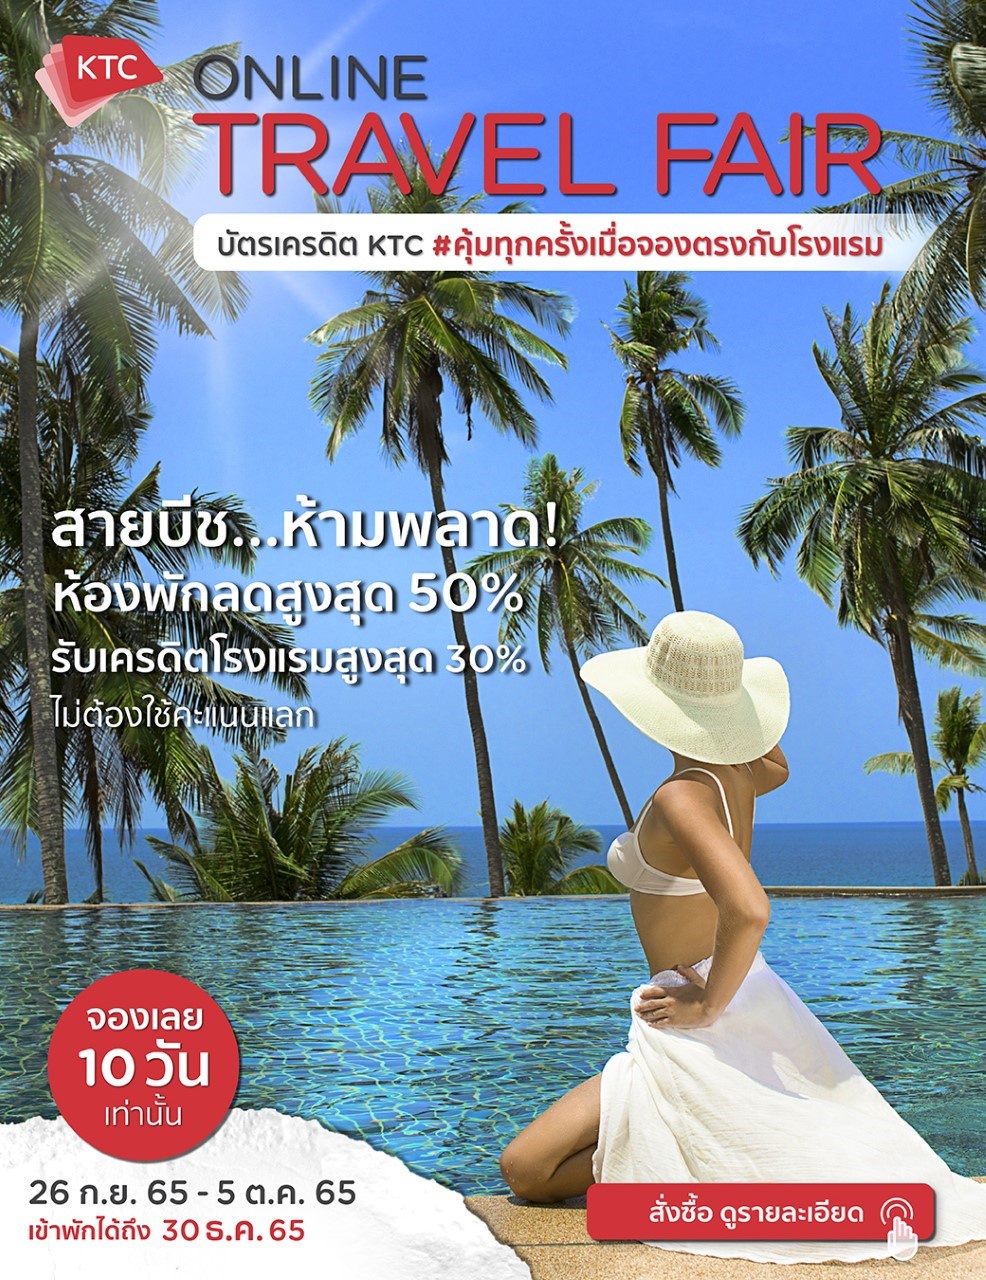 KTC arranges the 4th KTC Online Travel Fair, Beach Lovers Don't Miss Out! Special Price Vouchers for Hotels in Thailand.